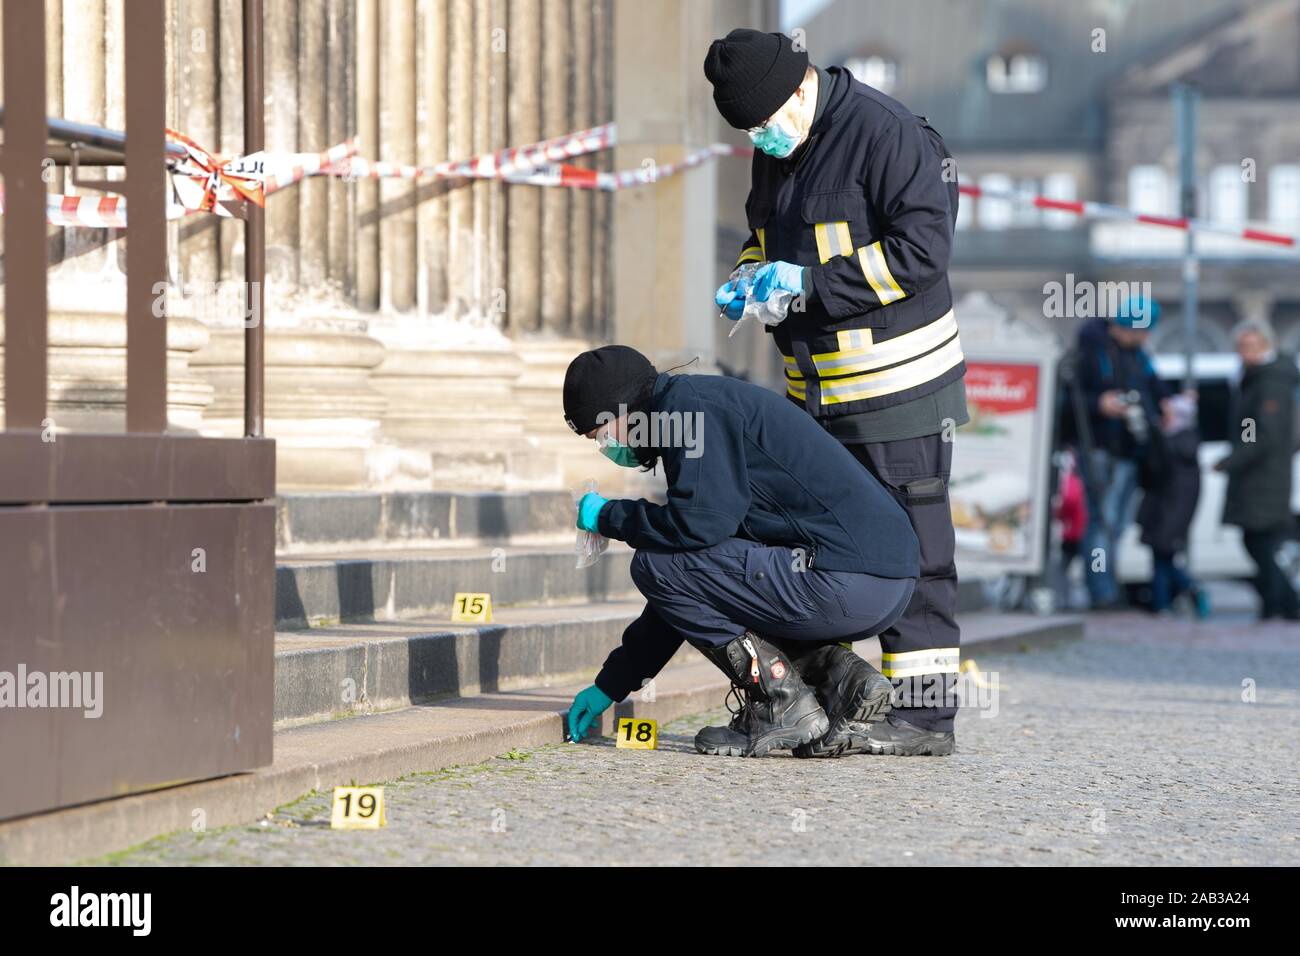 Dresden, Germany. 25th Nov, 2019. Police officers sit or stand in front of the Schinkelwache building. Dresden's Treasury Green Vault was broken into early in the morning. The break-in affects the historical part of the valuable collection. Credit: Sebastian Kahnert/dpa-Zentralbild/dpa/Alamy Live News Stock Photo